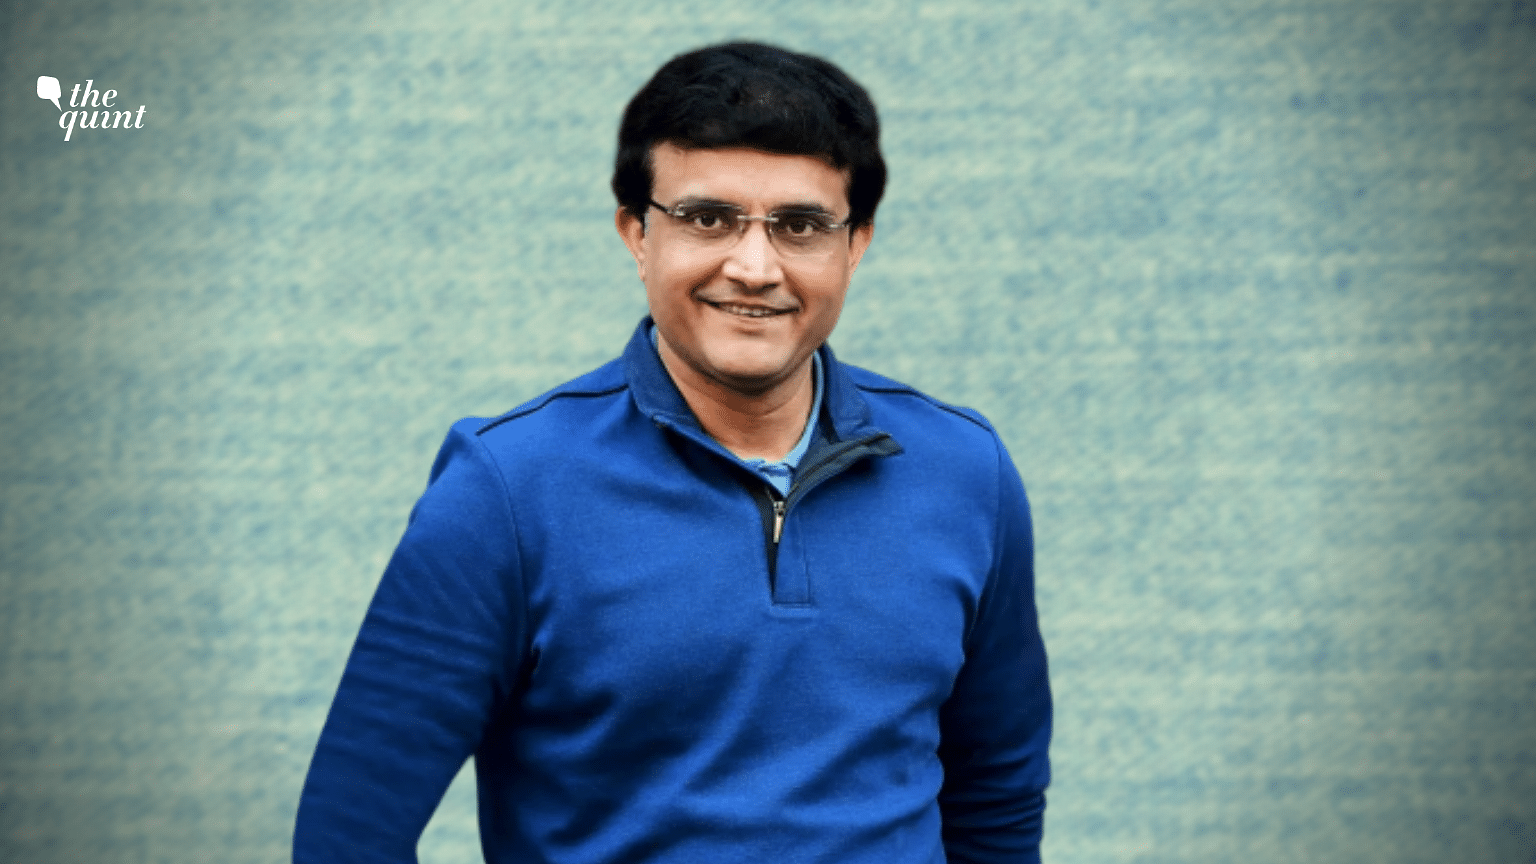 Sourav Ganguly will take charge as the President of BCCI after the AGM on 23 October.